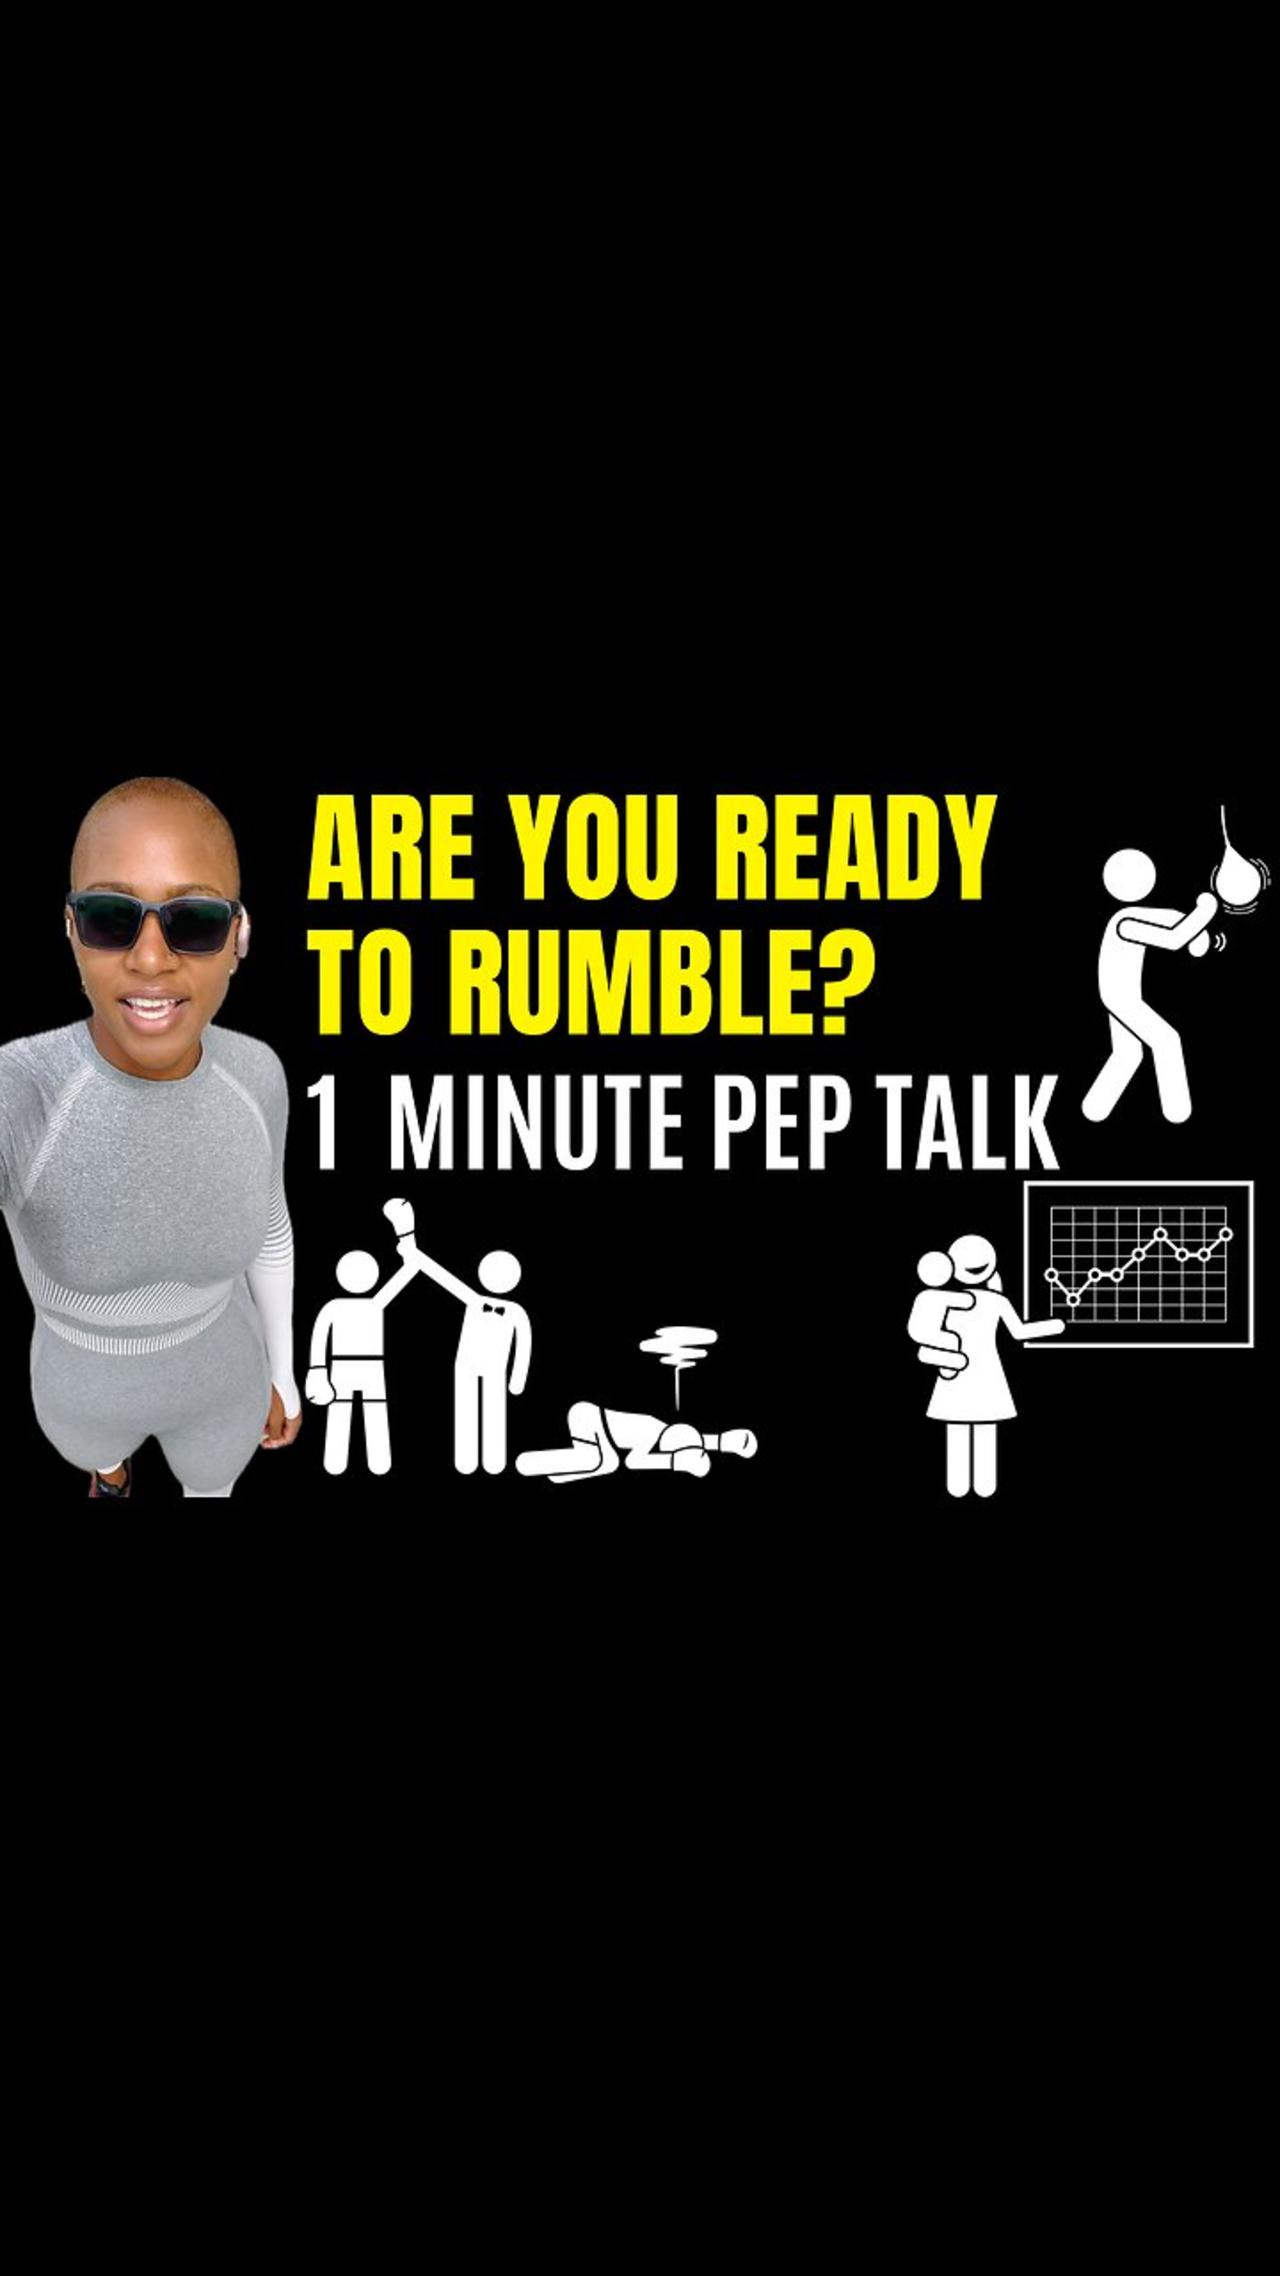 ARE YOU READY TO RUMBLE? (1 Minute Motivational Speech)